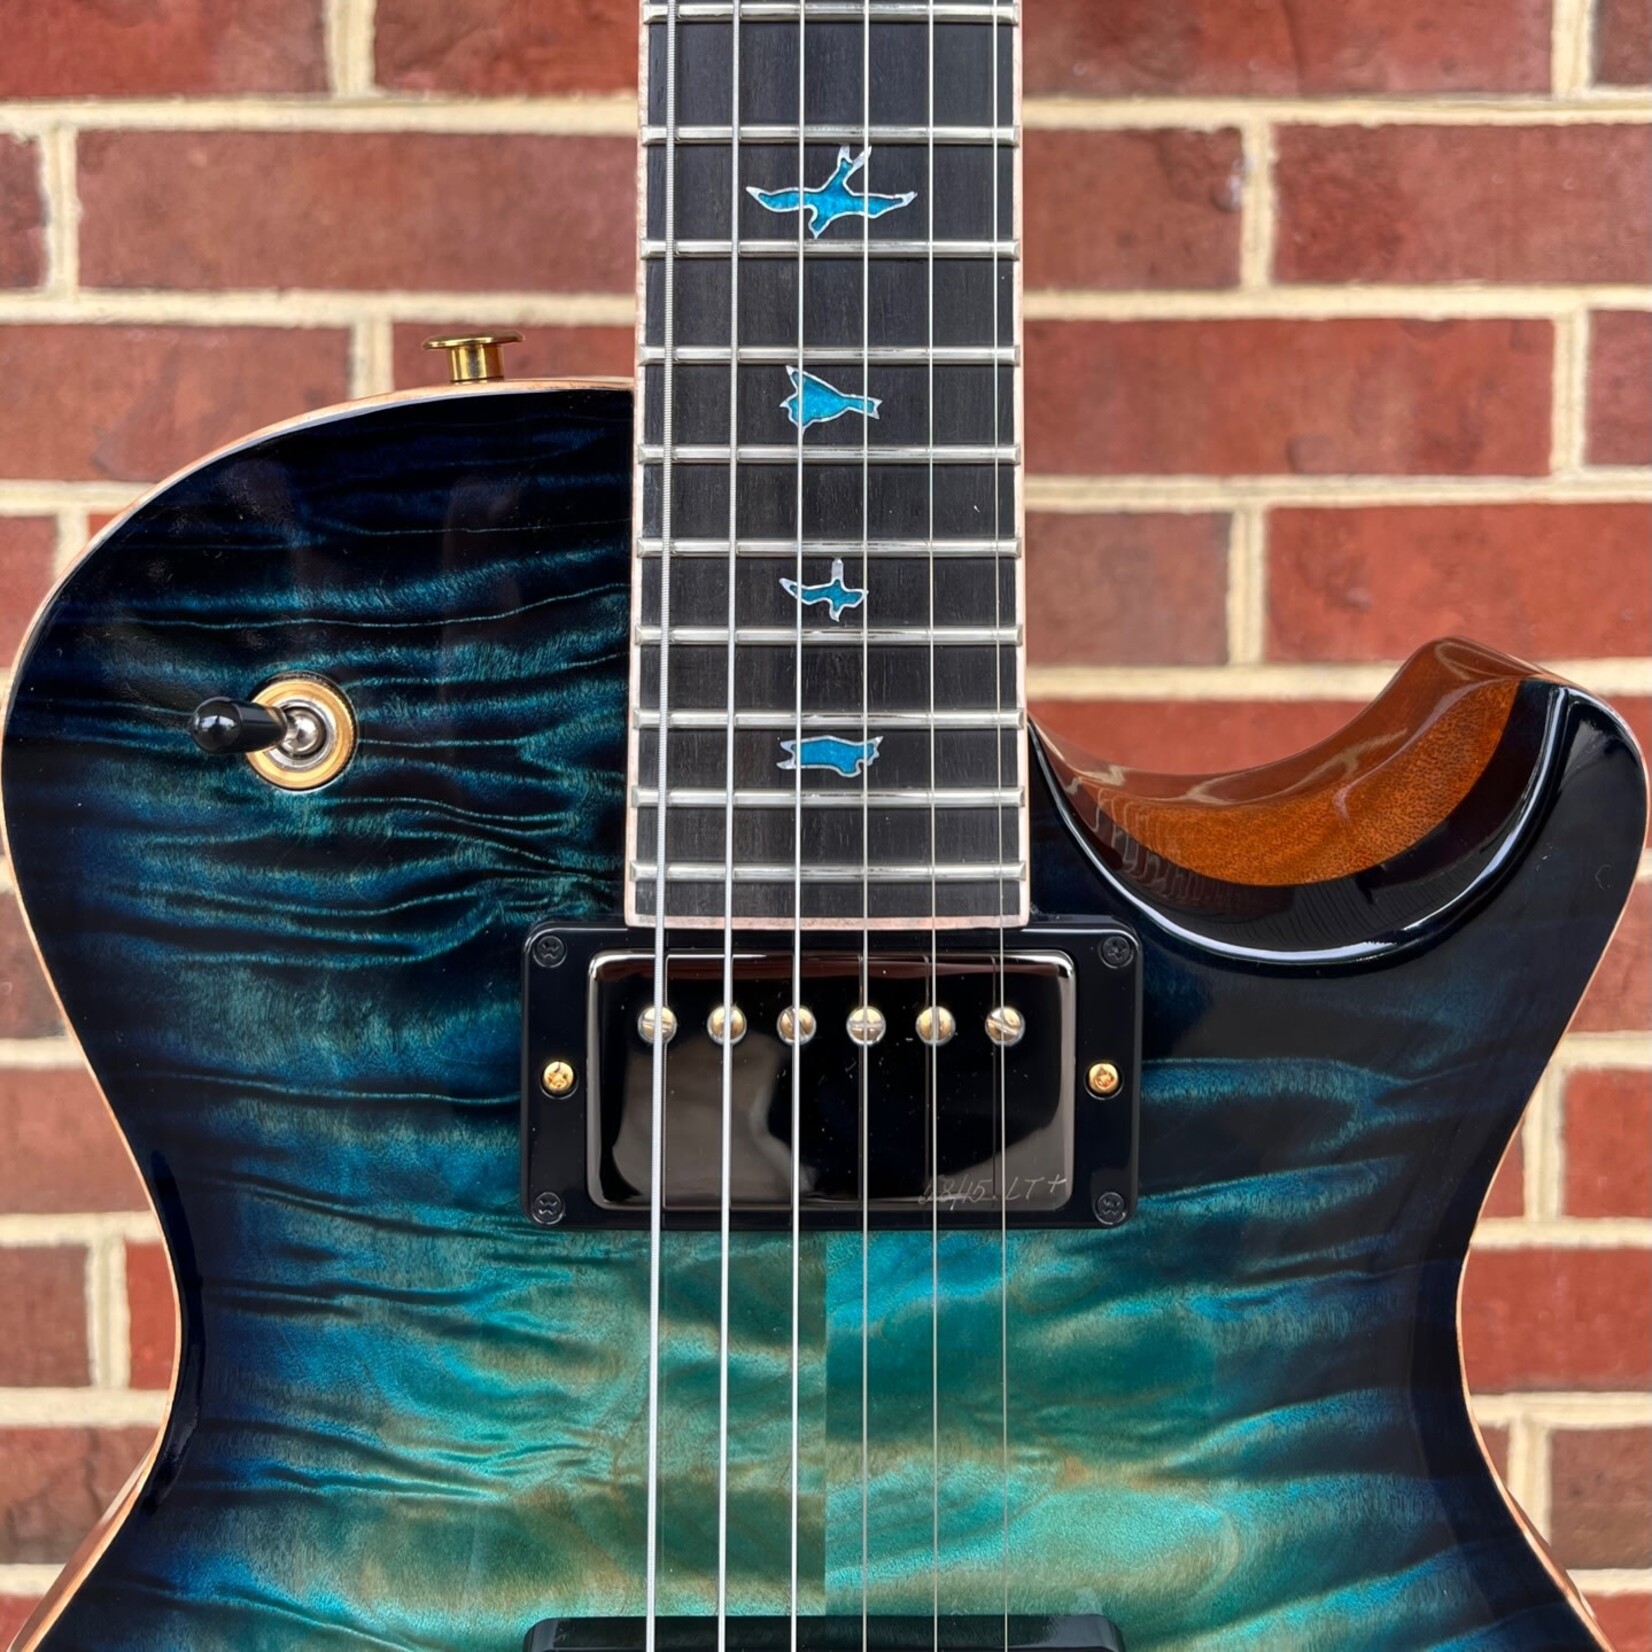 Paul Reed Smith Paul Reed Smith Private Stock McCarty 594 Singlecut, Sub Zero Glow Smokeburst, Quilted Maple Top, Figured Mahogany Body, Figured Mahogany Neck, Ebony Fretboard, Stained Curly Maple Bird Inlays with Sparkle Mother of Pearl Outlines, Smoked Black Hardware